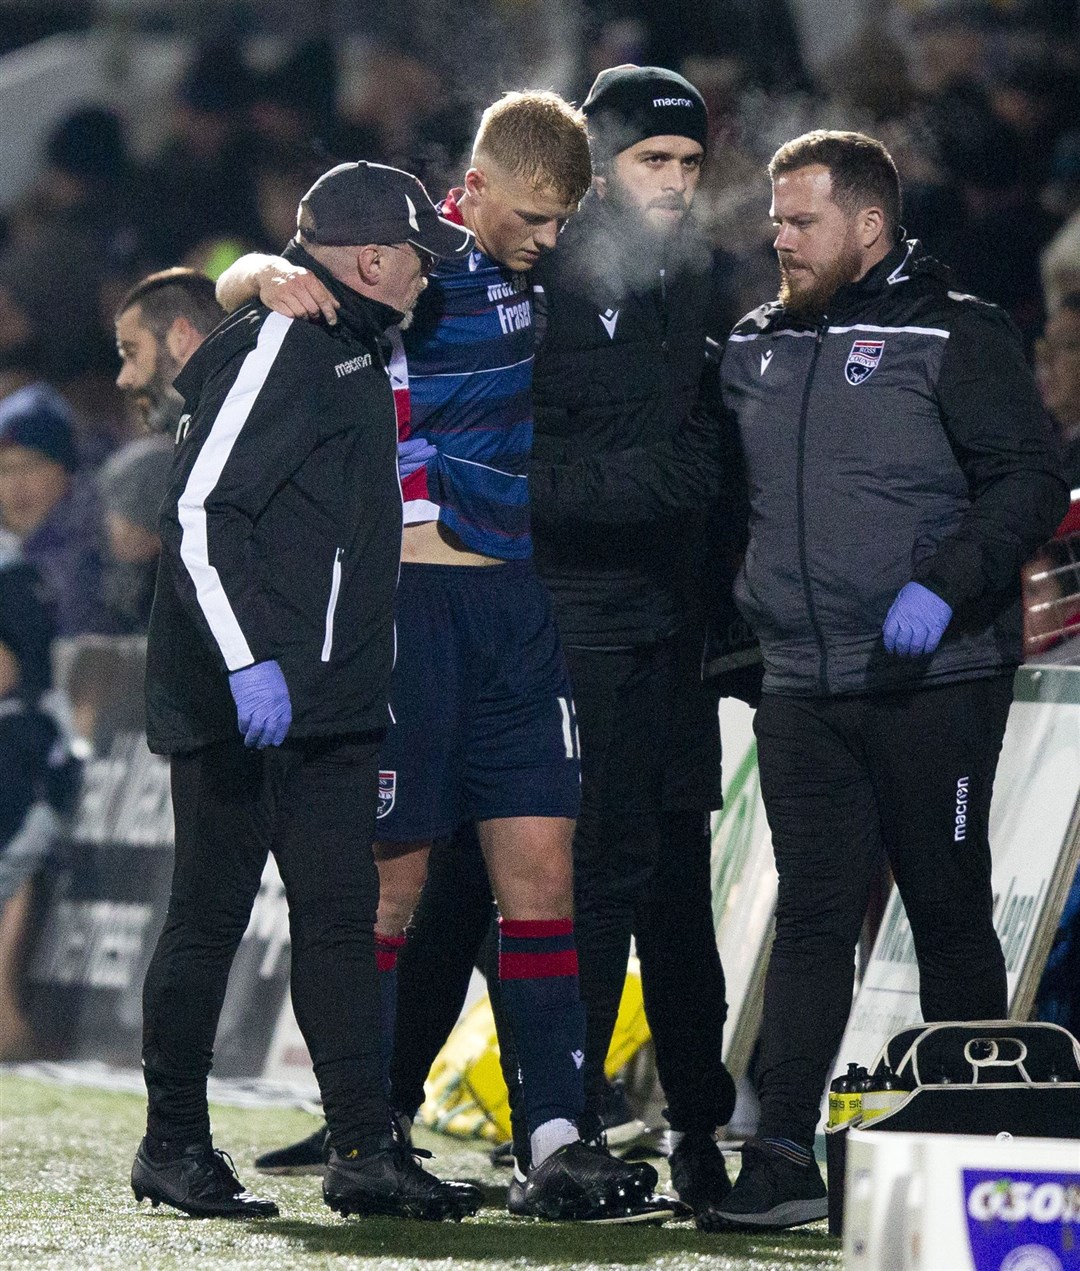 Yesterday marked one full year since Grivosti suffered his injury against Rangers.